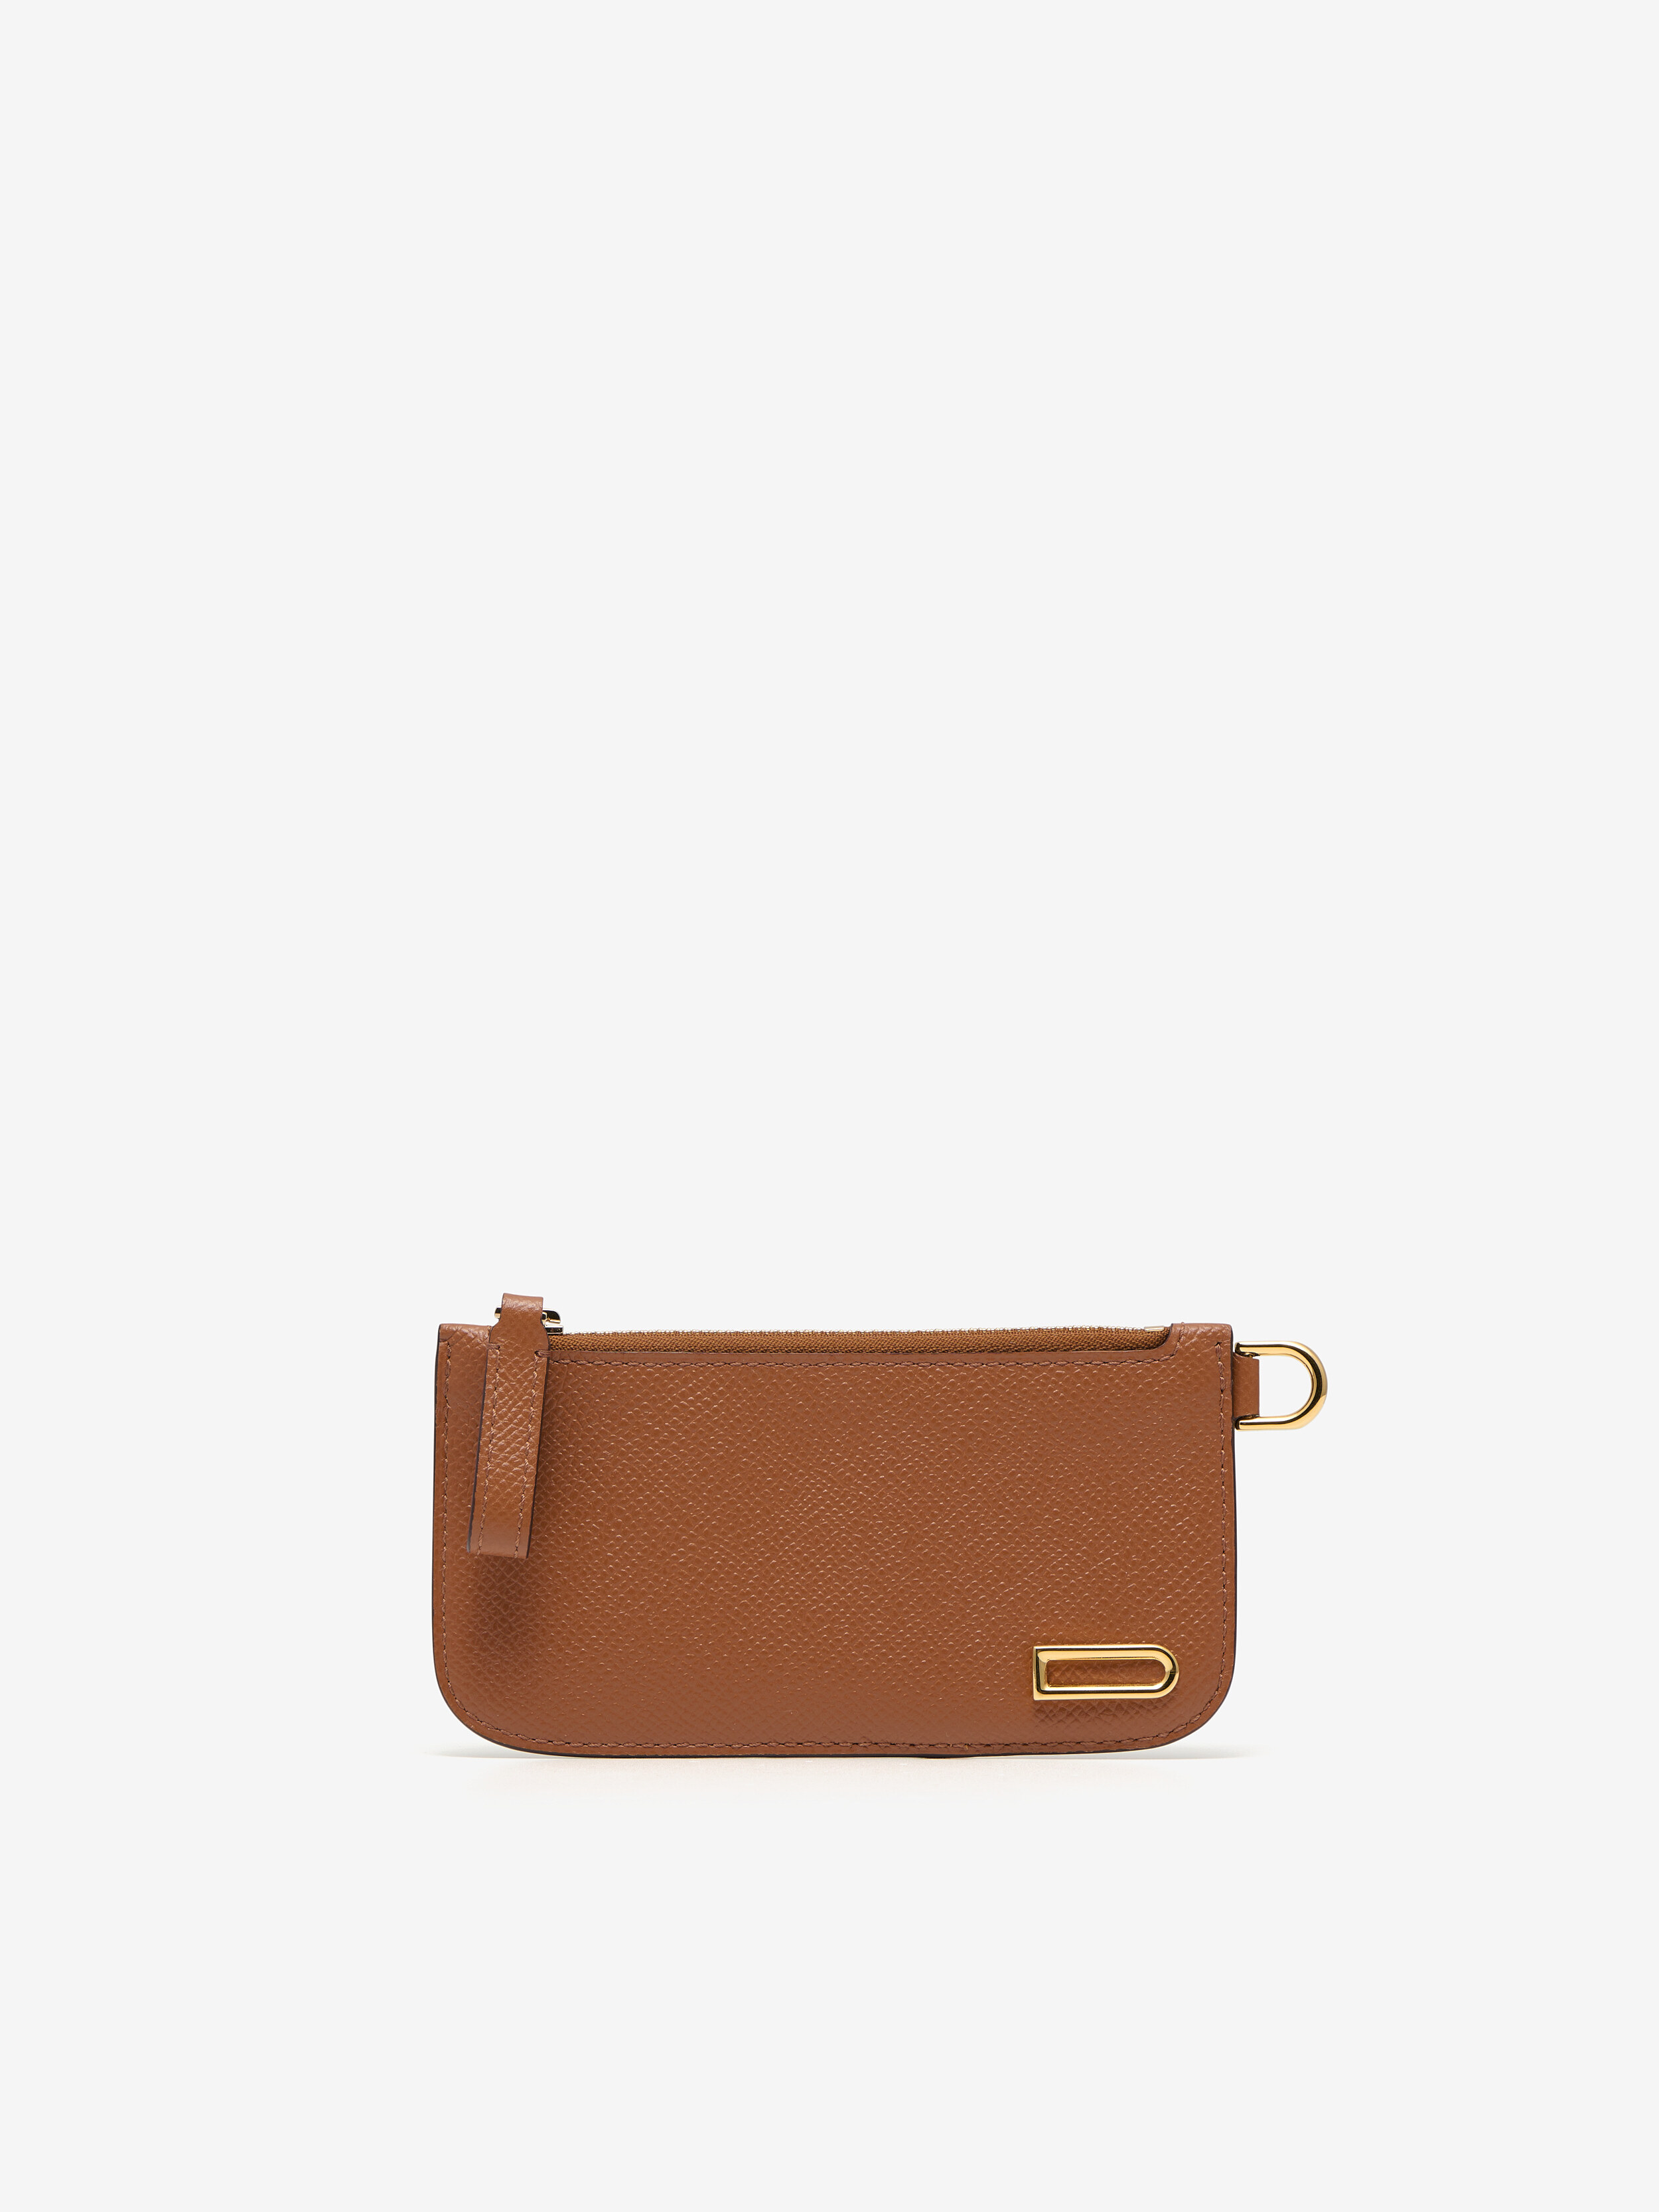 Small leather goods | Delvaux